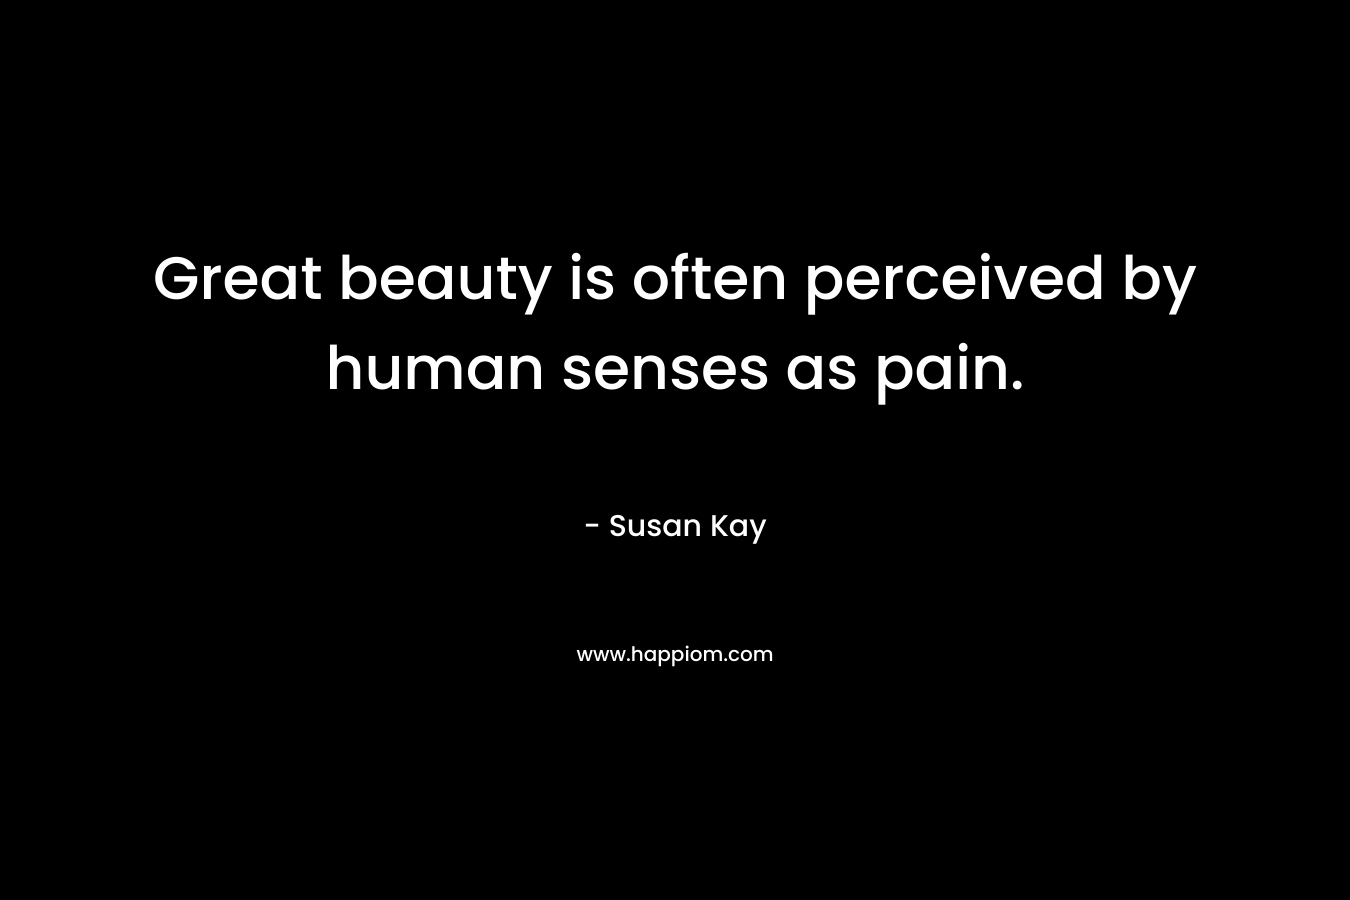 Great beauty is often perceived by human senses as pain.